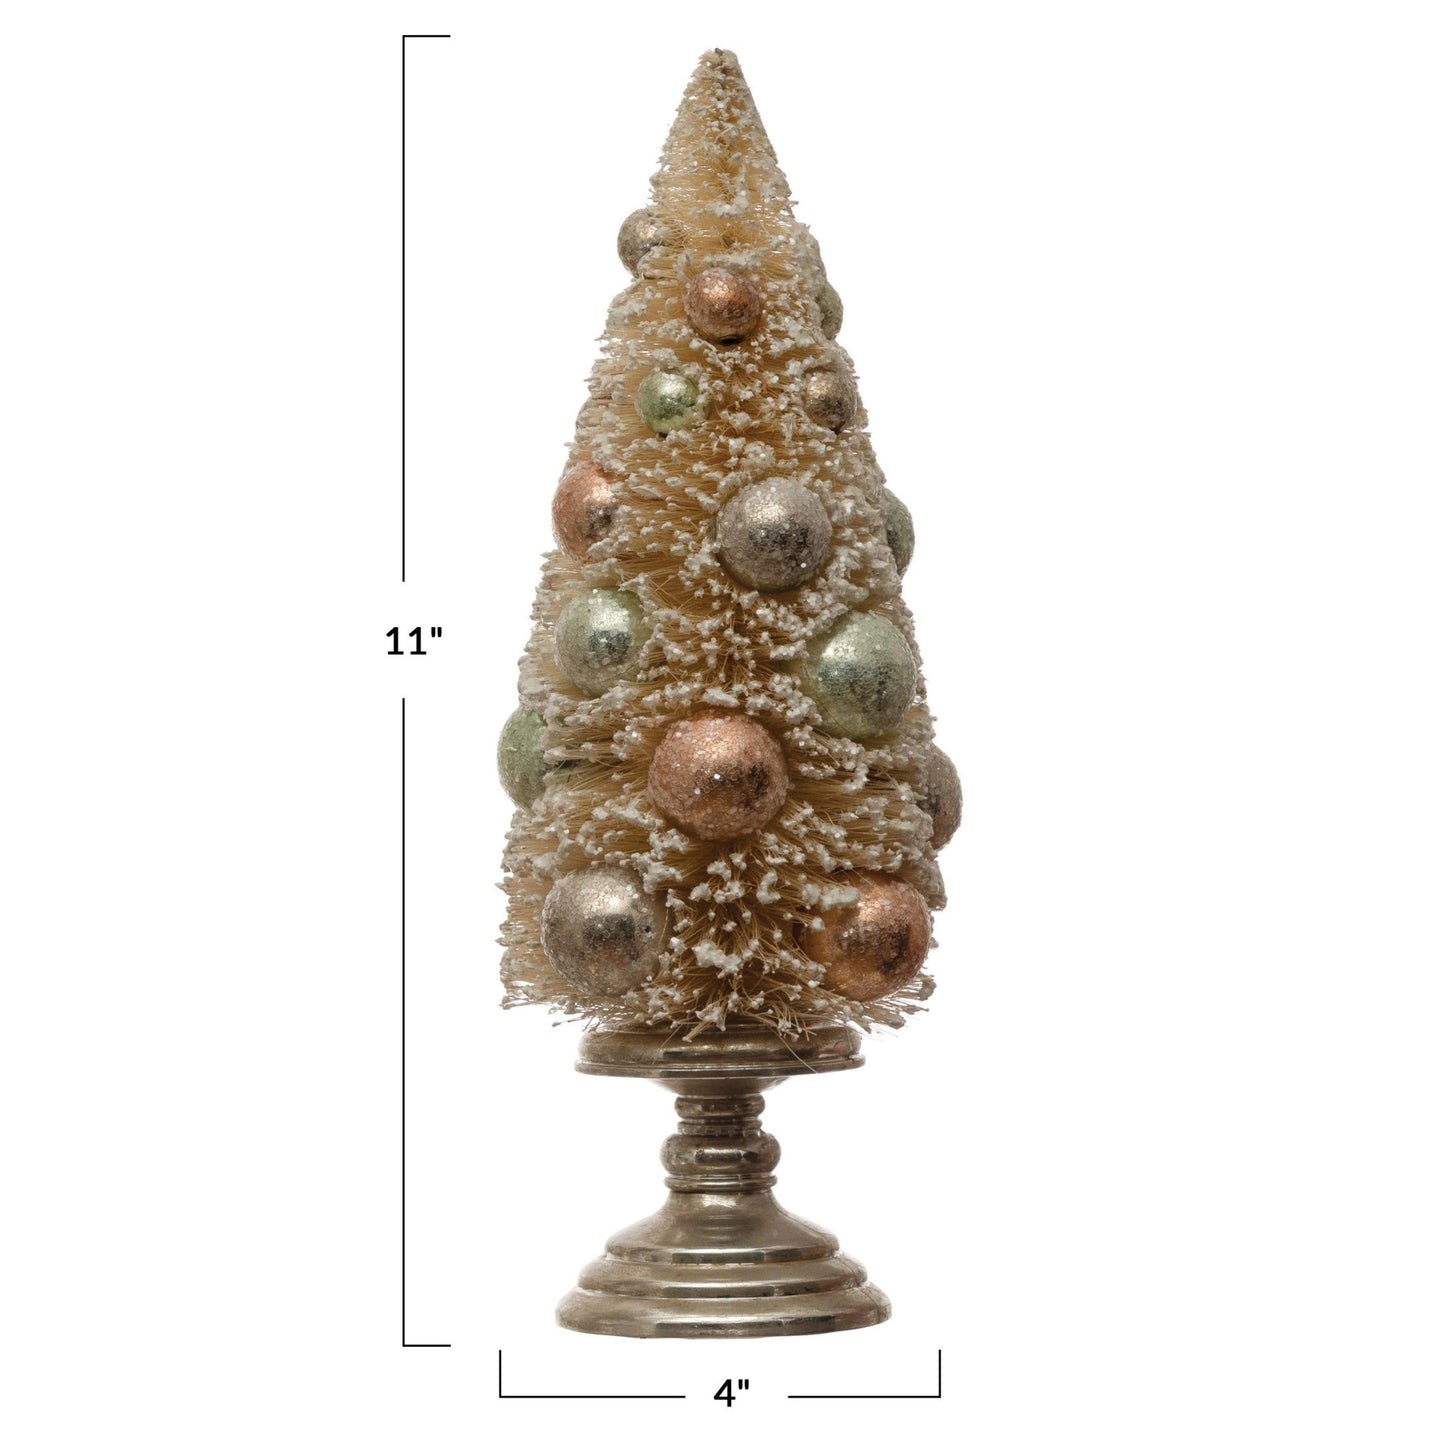 Bottle Brush Tree with Ornaments on Glass Pedestal - Royalties